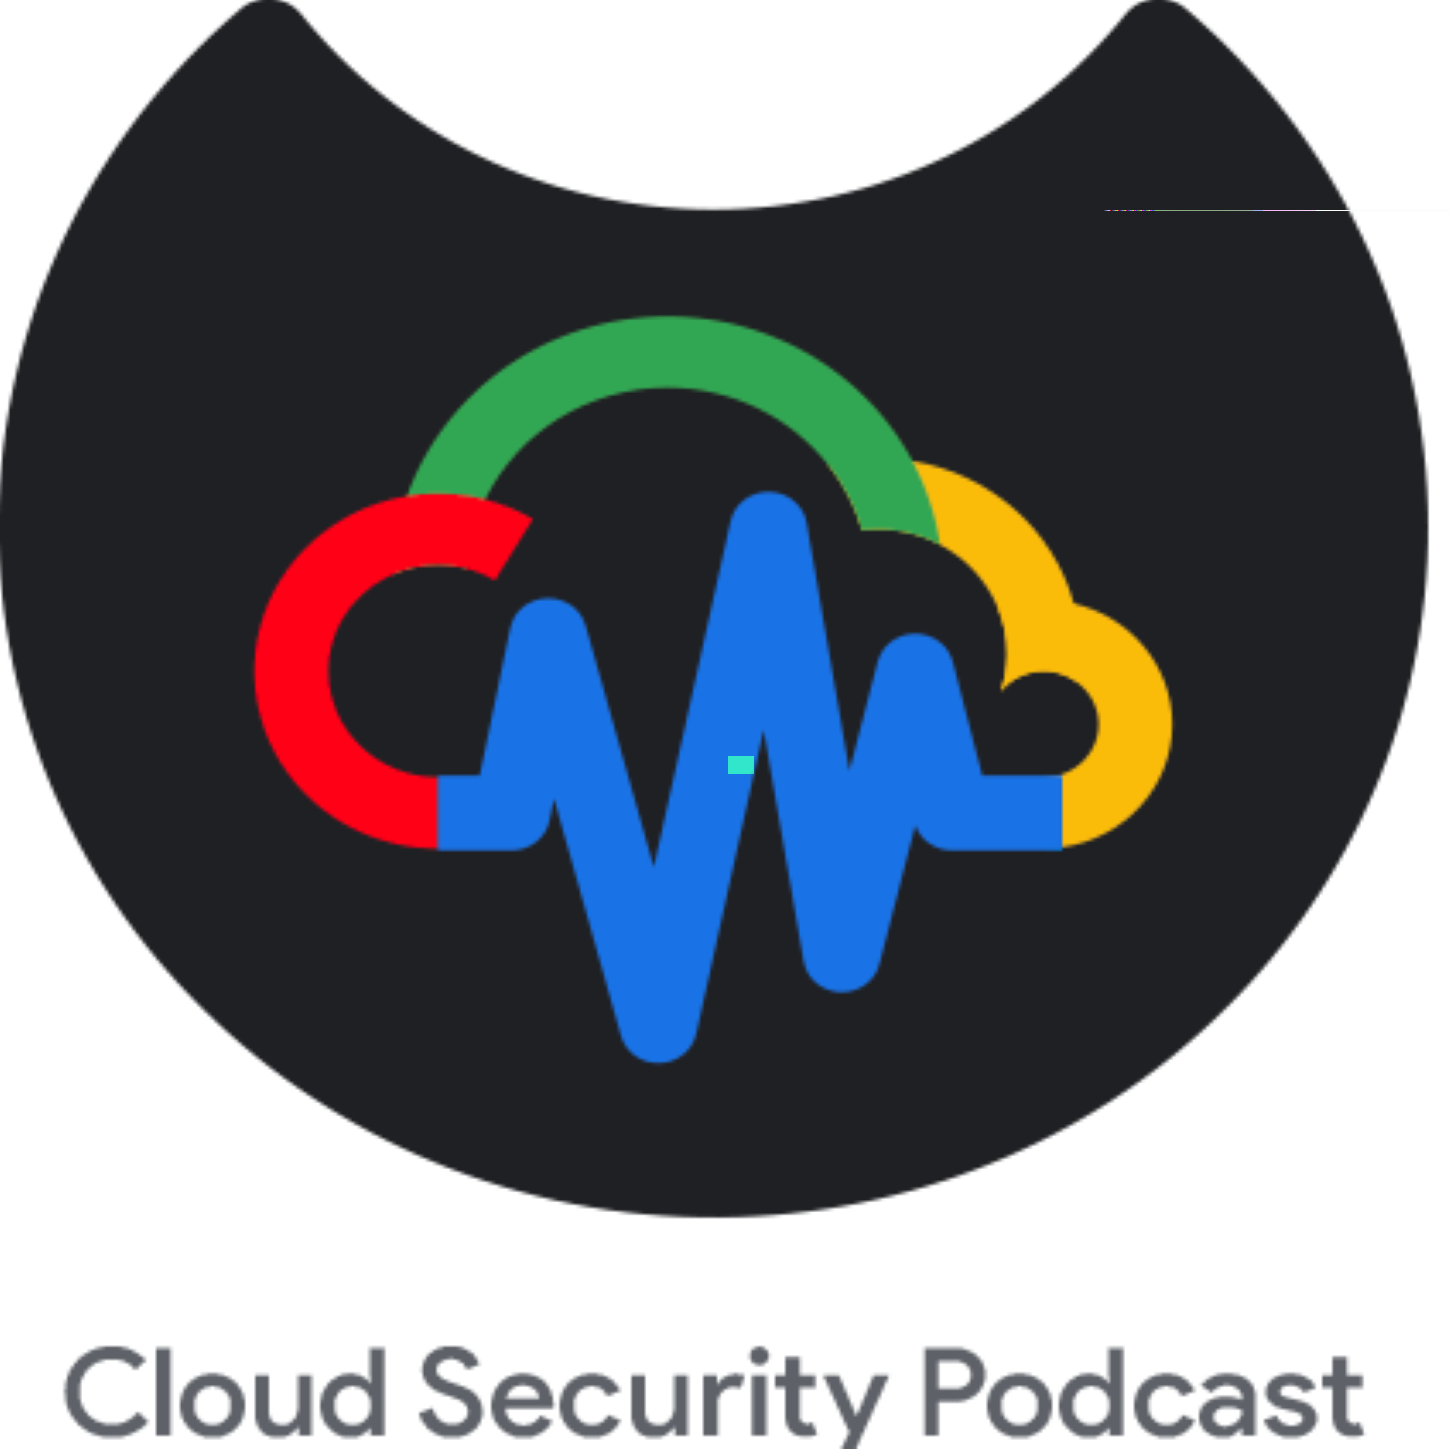 A highlight from EP96 Cloud Security Observability for Detection and Response